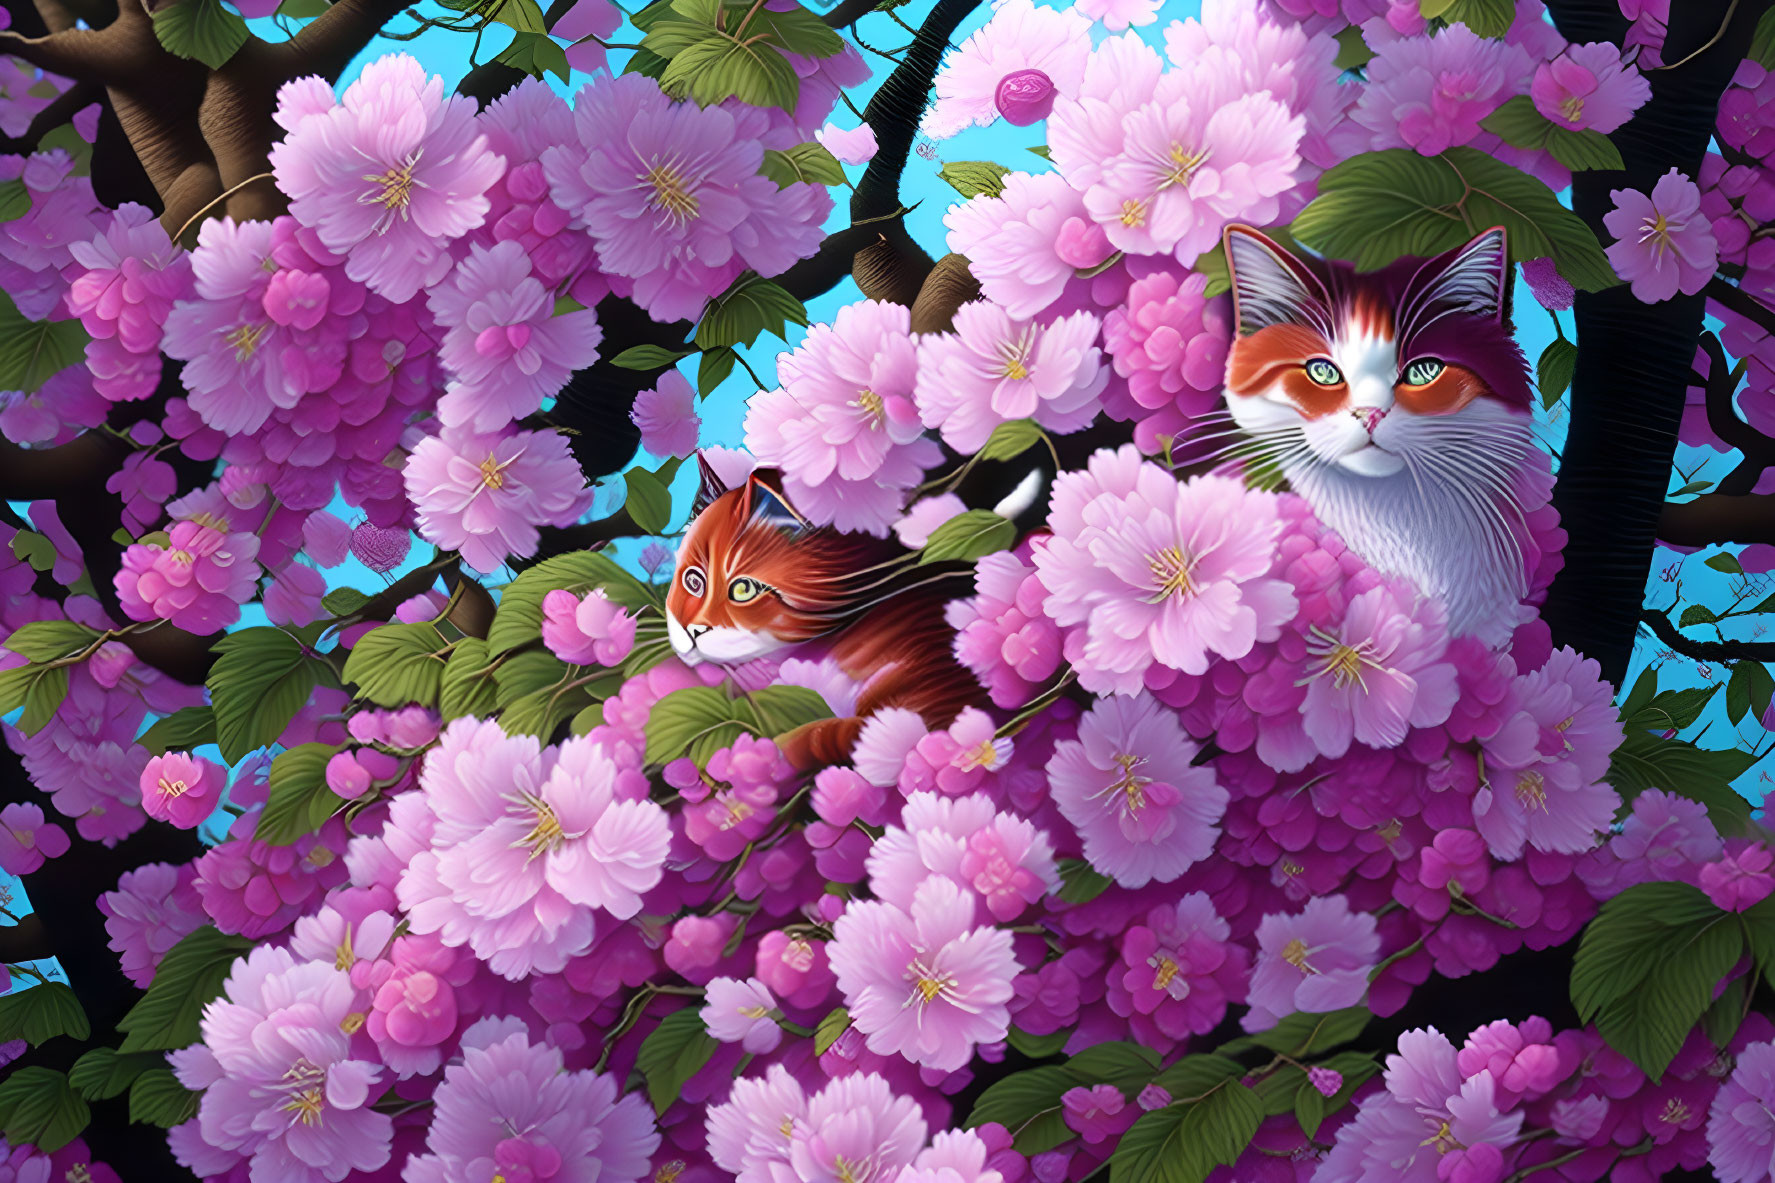 Vibrant Marked Cats Among Cherry Blossoms in Blue Sky